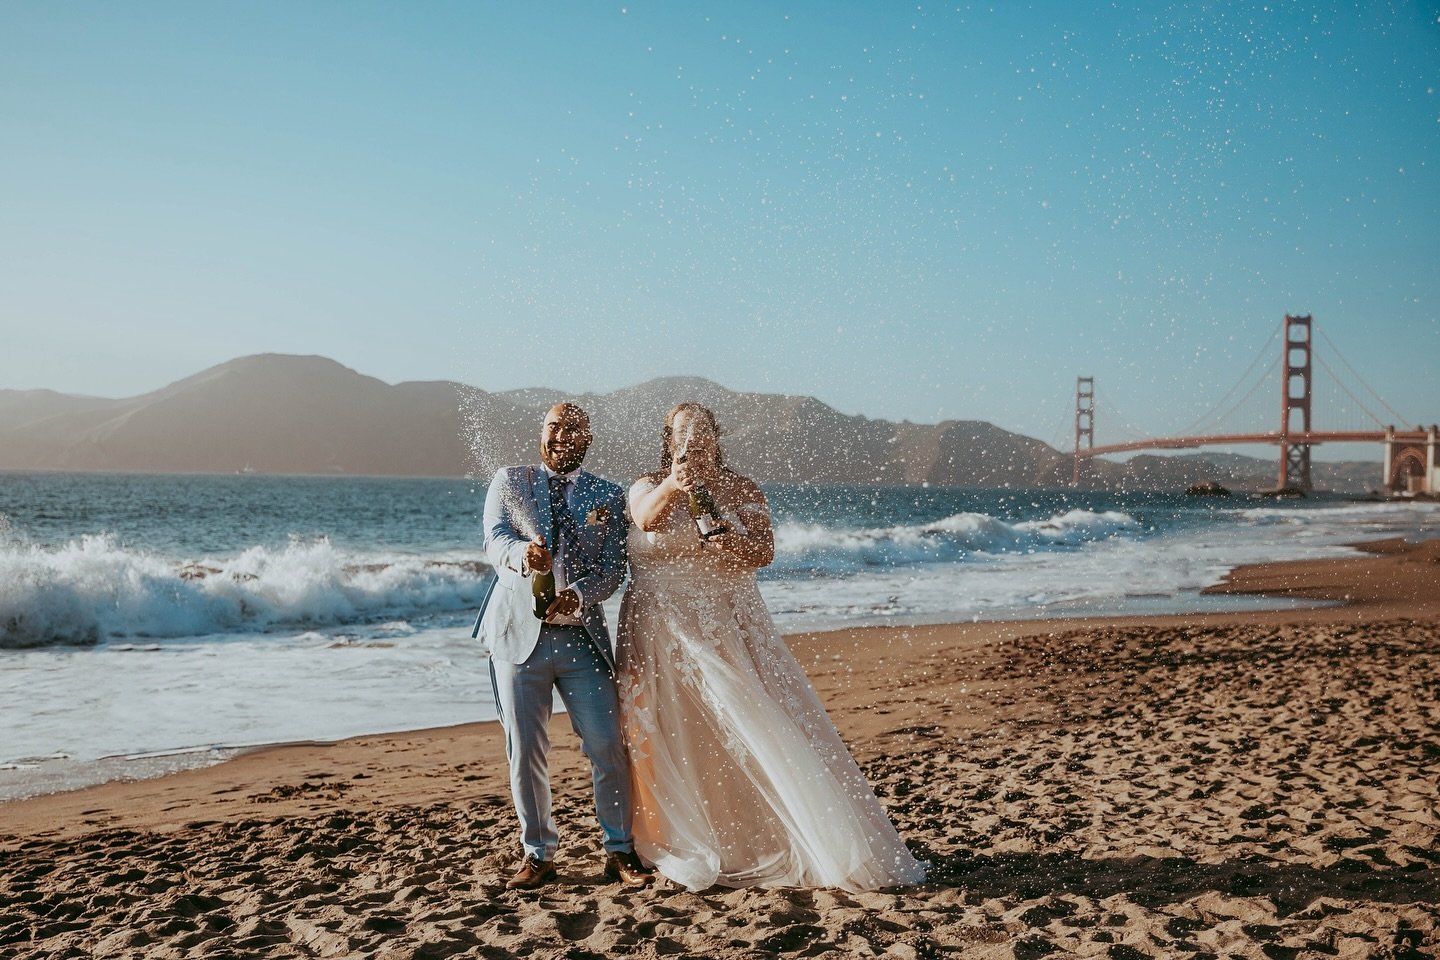 Cheers to love, laughter, and champagne sprays! 🍾💍✨ Celebrating the most incredible San Francisco/Milbrae wedding with the coolest couple who knows how to keep the party going!